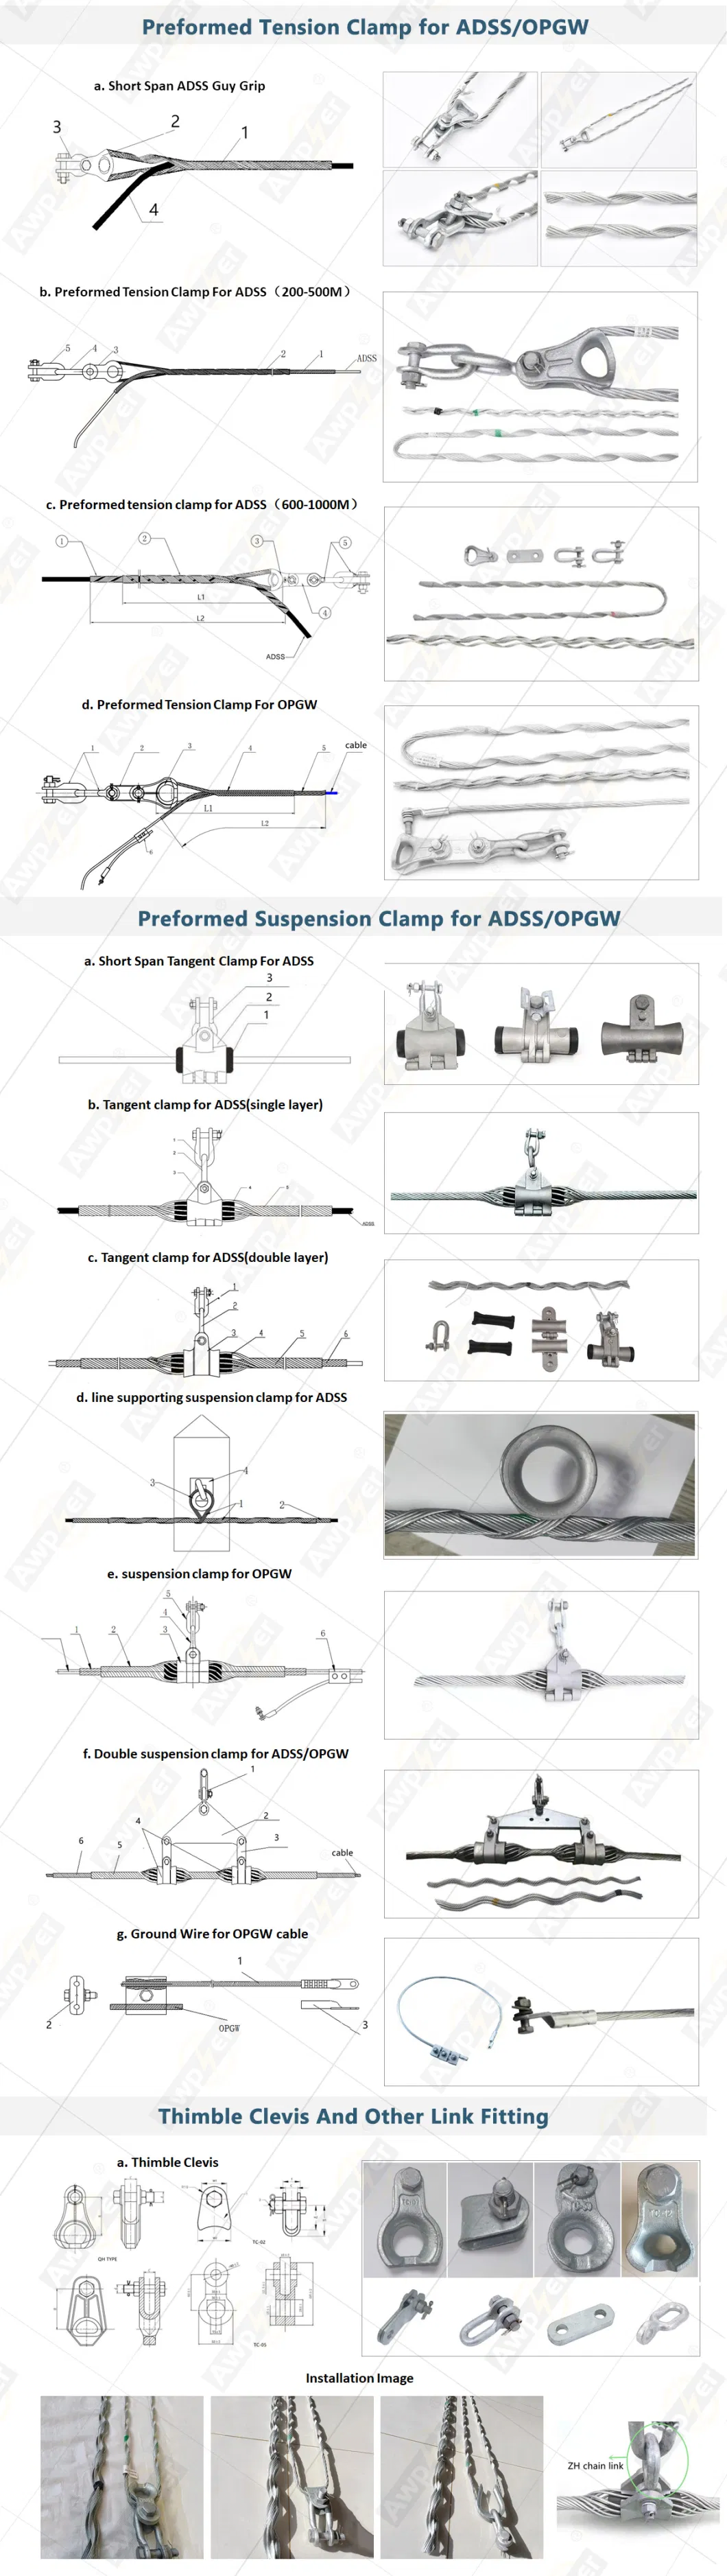 ADSS Cable Fitting Preformed Double Suspension Set Clamp for Span